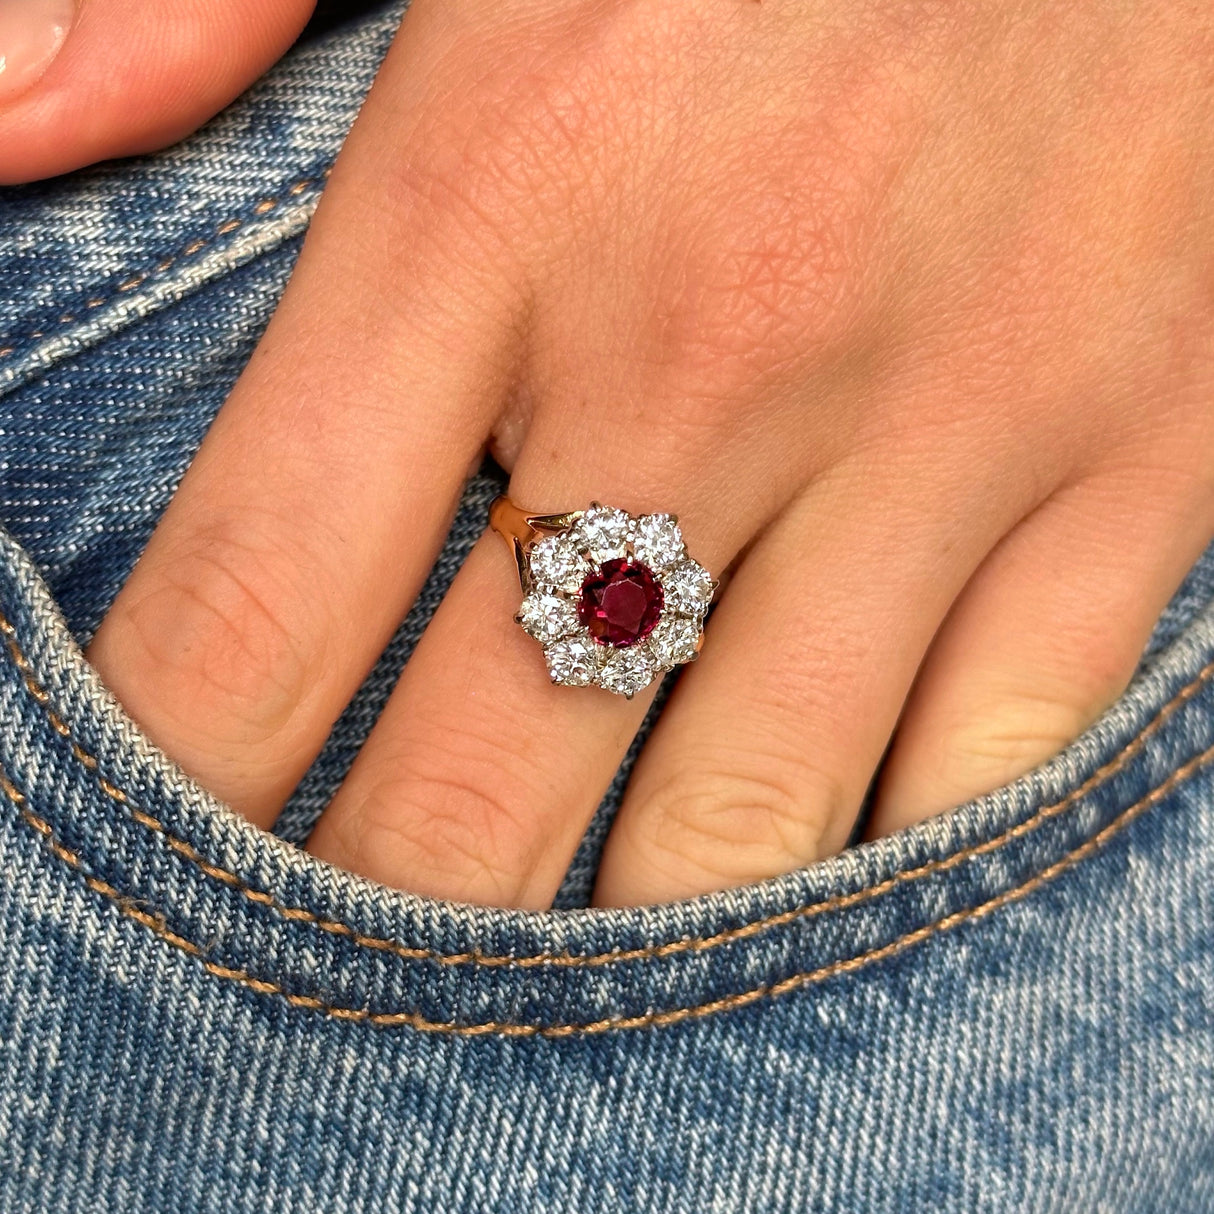 antique ruby and diamond cluster ring worn on the middle finger on a hand placed into the pocket of denim jeans. 